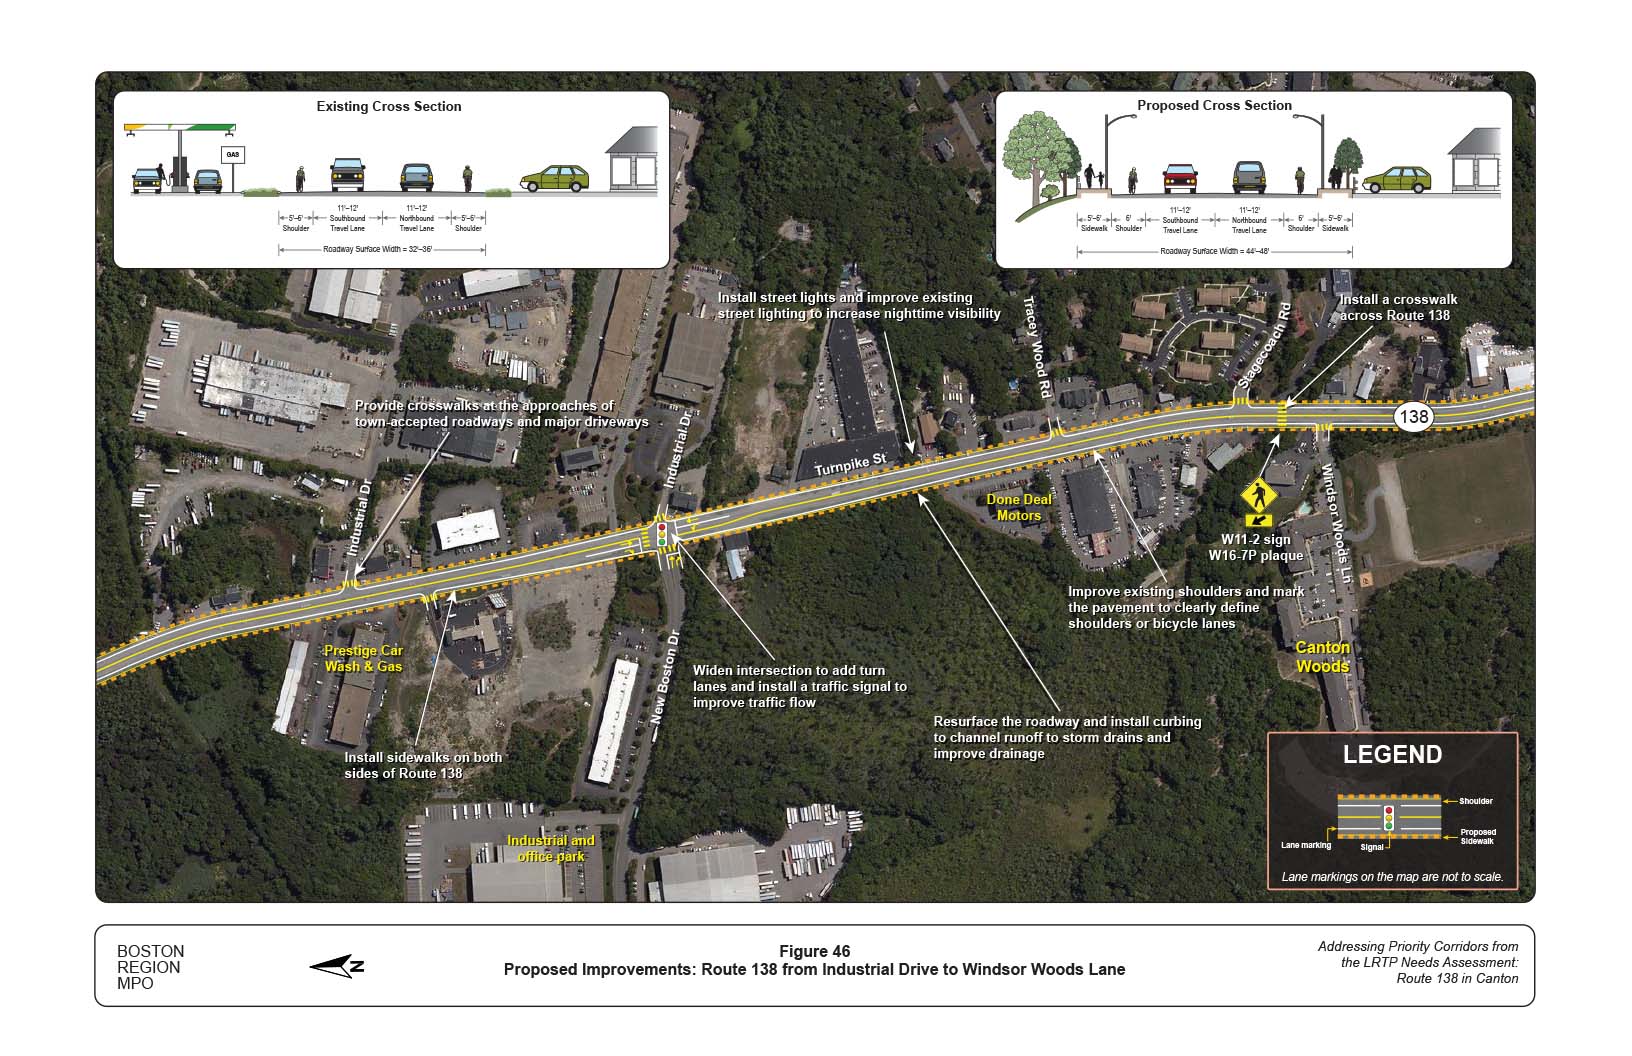 Figure 46 is map of Route 138 from Industrial Drive to Windsor Woods Lane with overlays showing the proposed improvements to the roadway and graphics of the current and proposed cross section of the roadway.